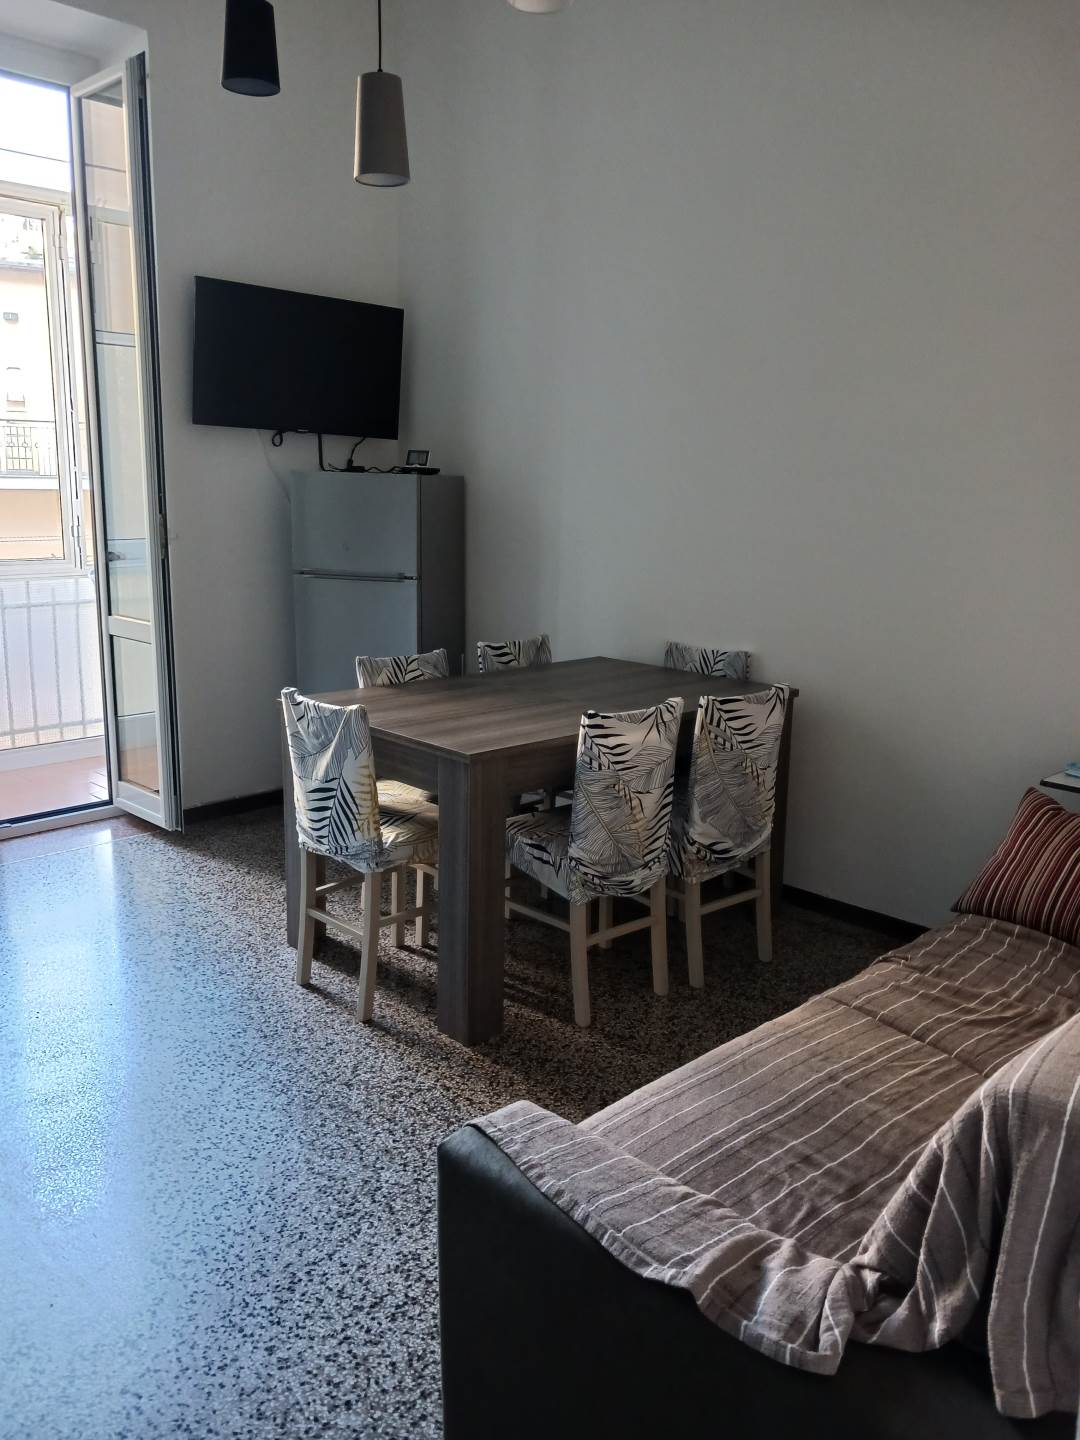 S. RITA, SAVONA, Apartment for rent of 60 Sq. mt., Good condition, Heating Individual heating system, Energetic class: G, placed at 2° on 6, composed 